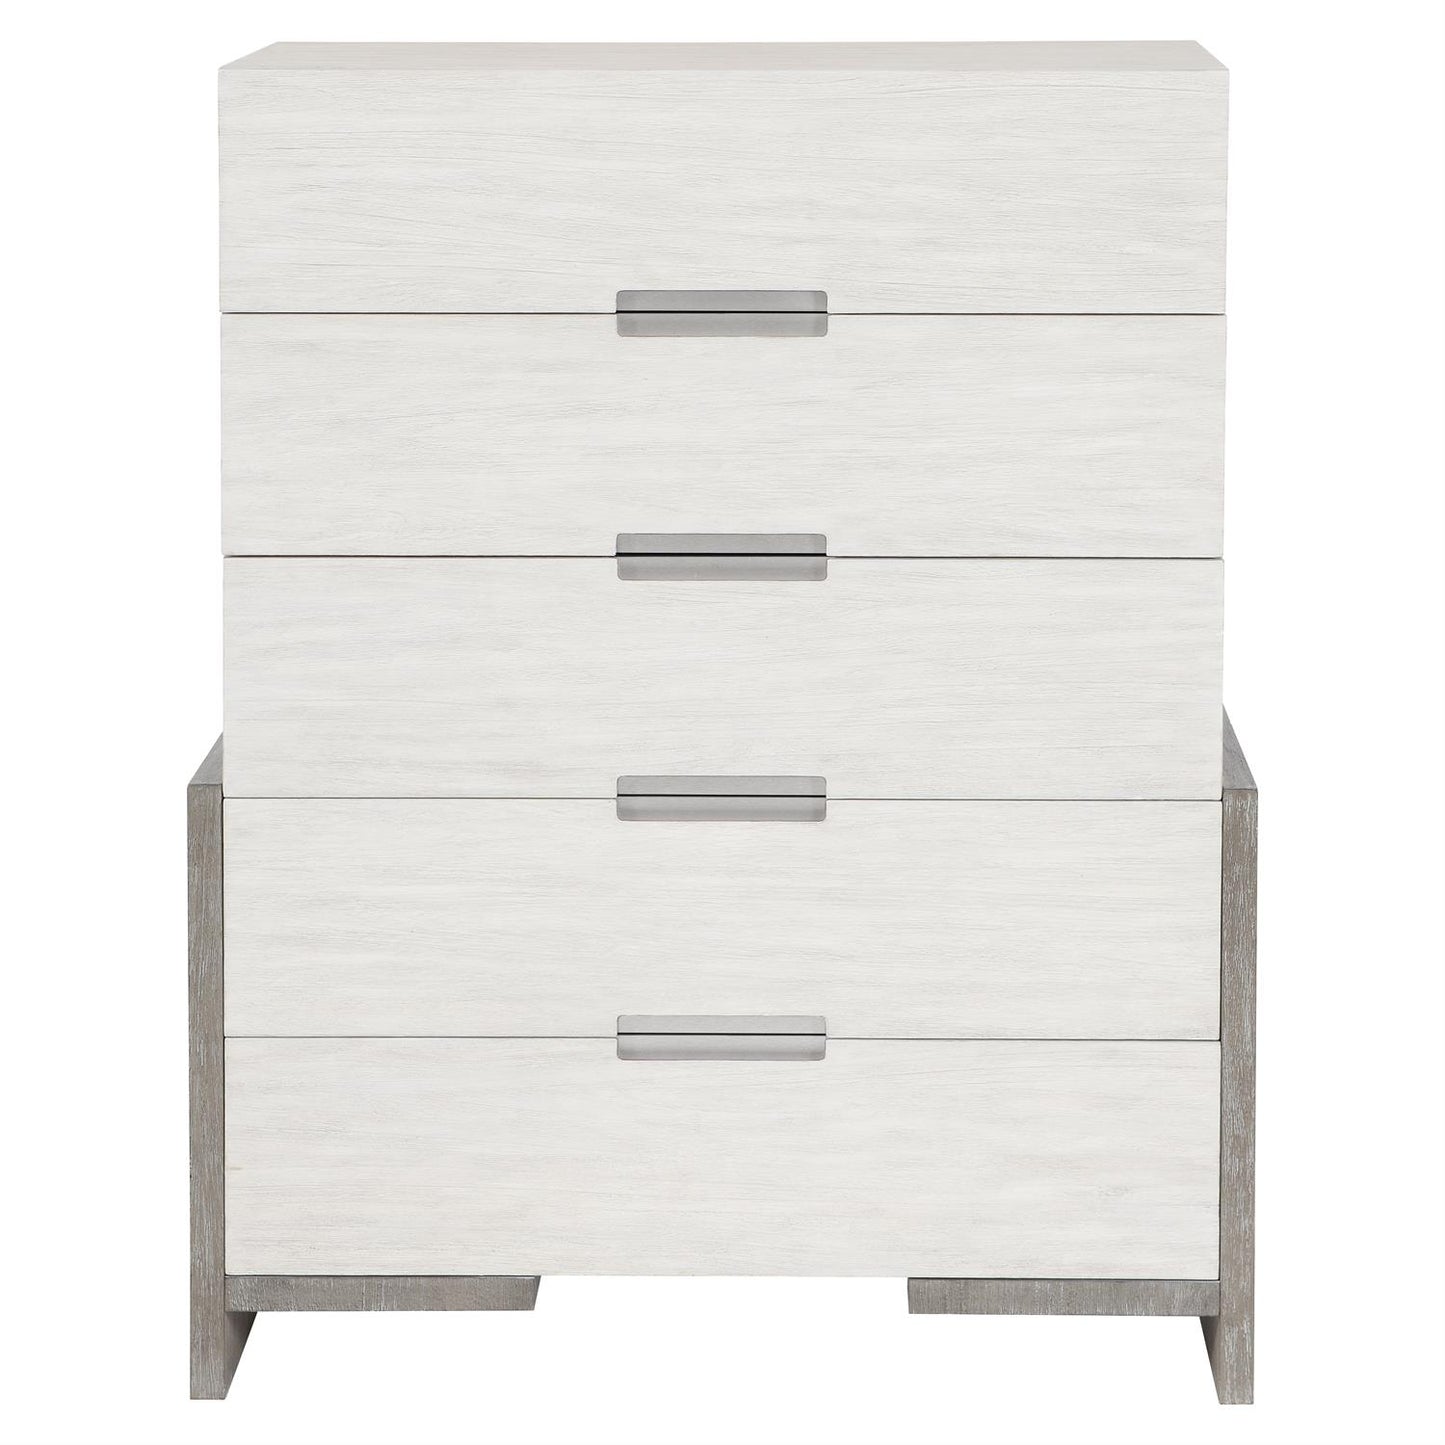 Foundation Tall Drawer Chest